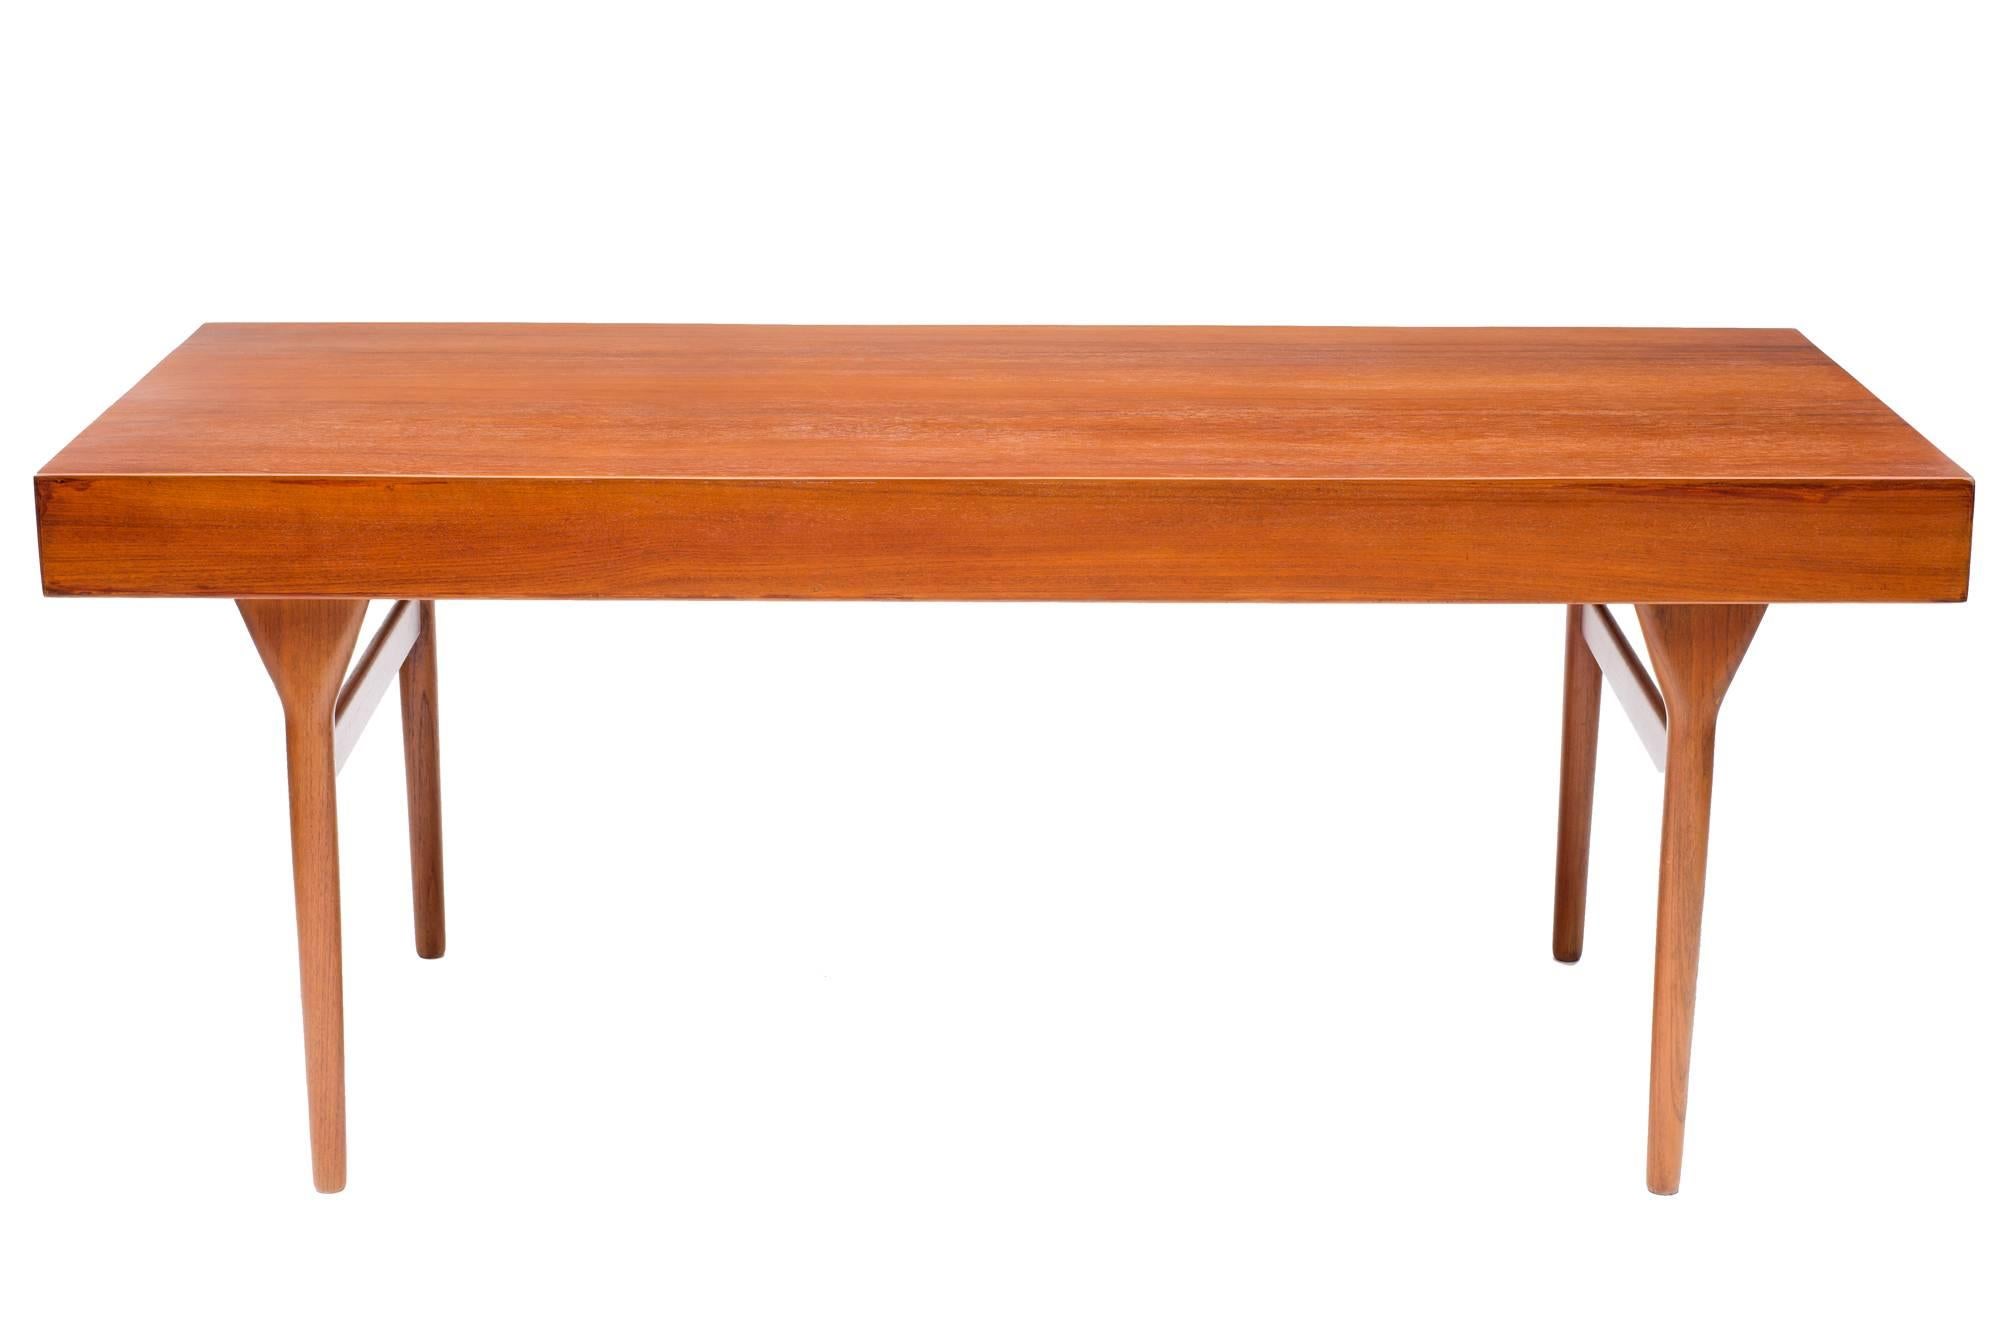 Perhaps the most beautiful Mid-Century desk ever designed. This desk by Danish great Nanna Ditzel and Jorgen Ditzel is amply proportioned (69